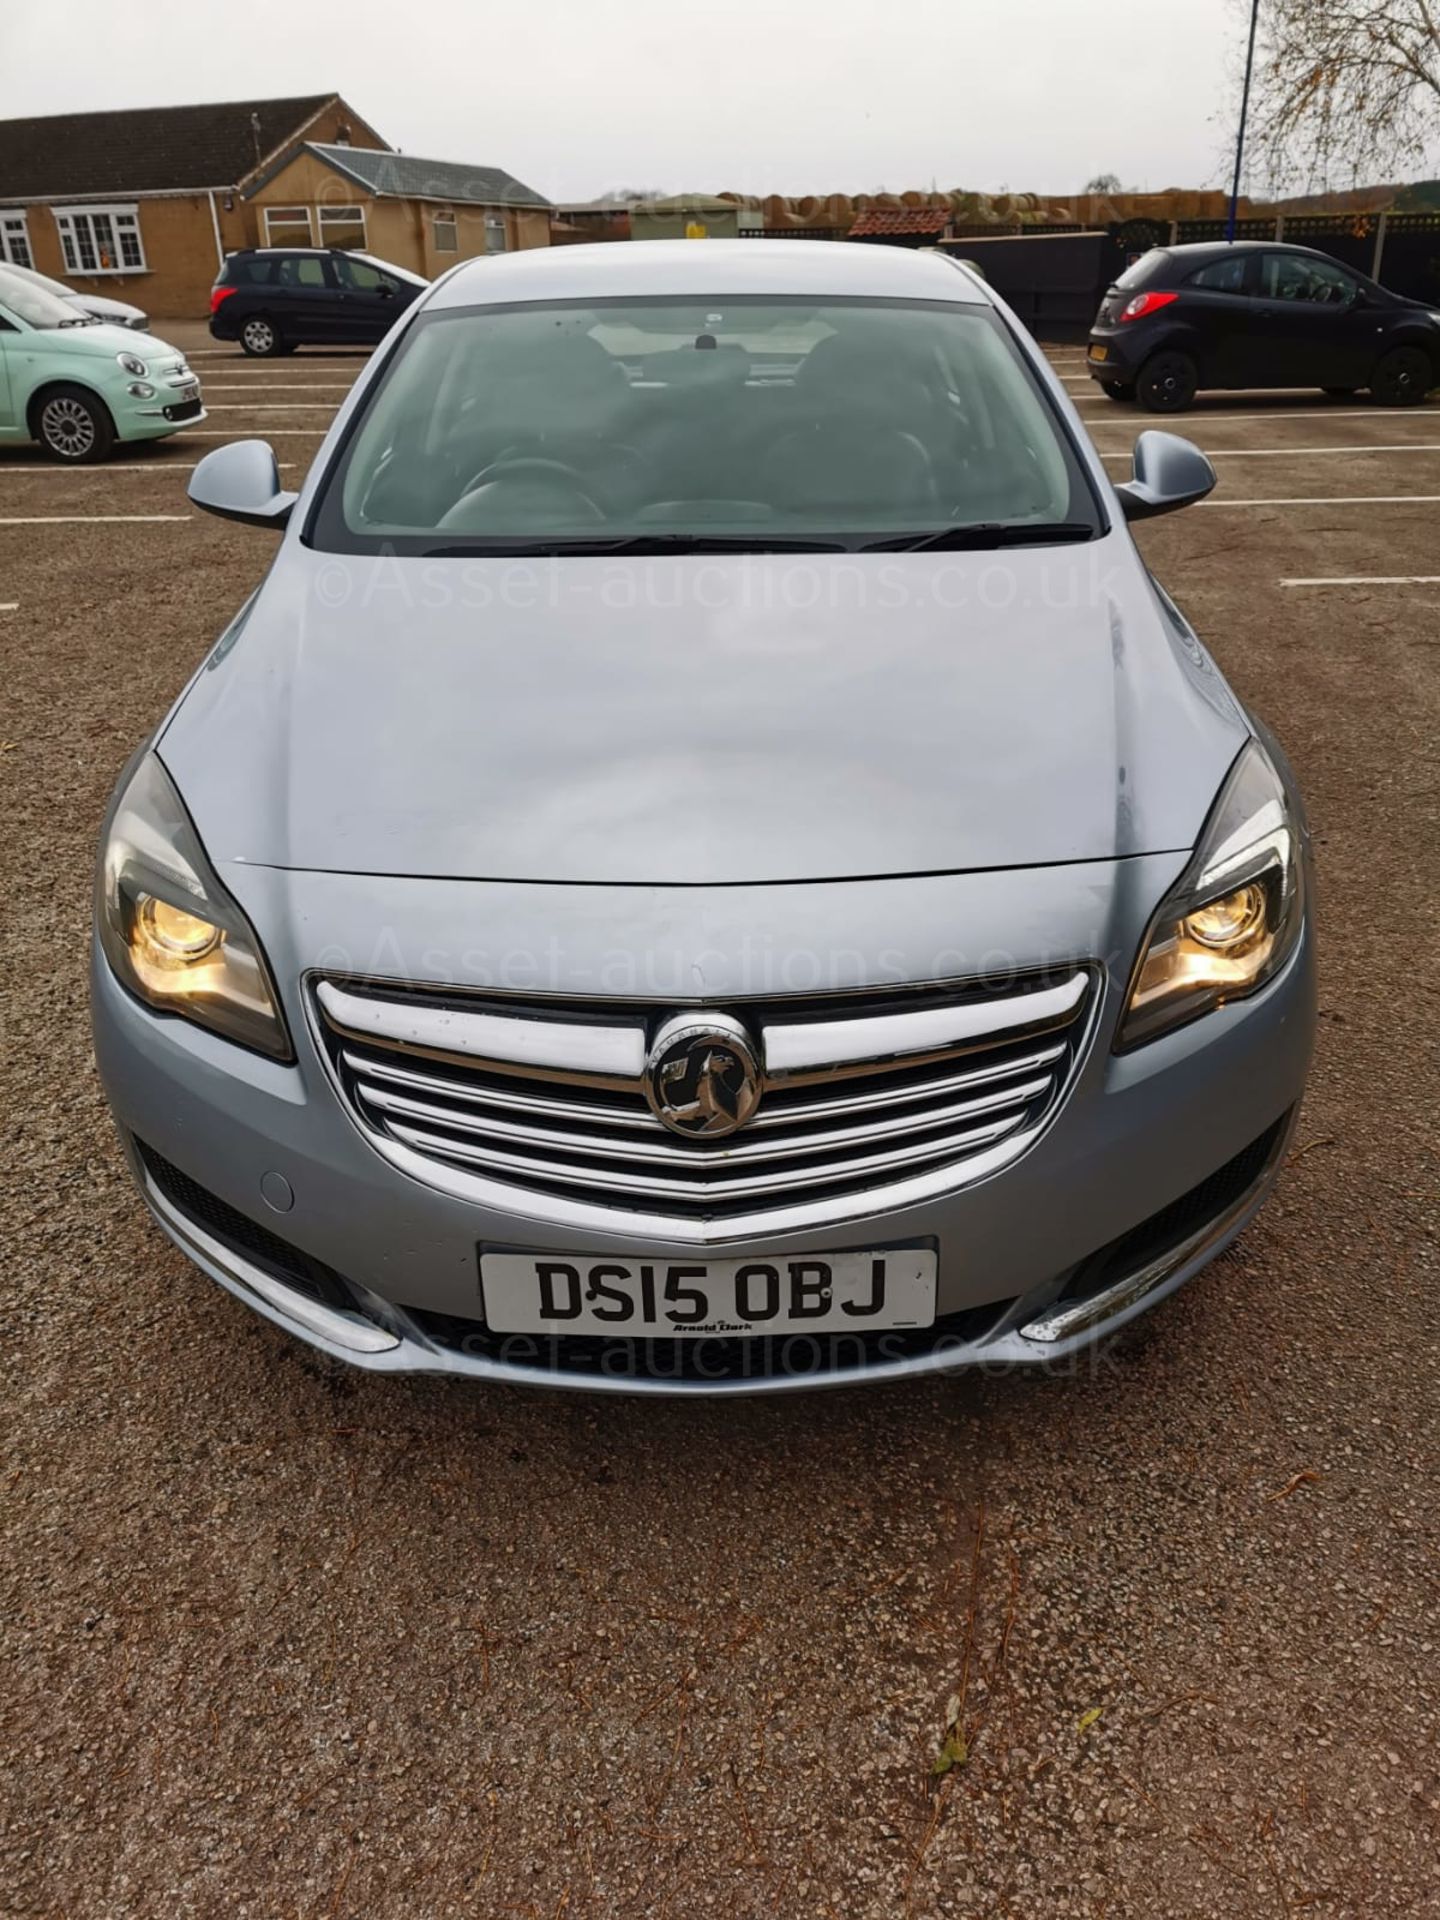 2015 VAUXHALL INSIGNIA DSIGN NAV CDTI ECO SS SILVER HATCHBACK, 83,799 MILES *NO VAT* - Image 2 of 27